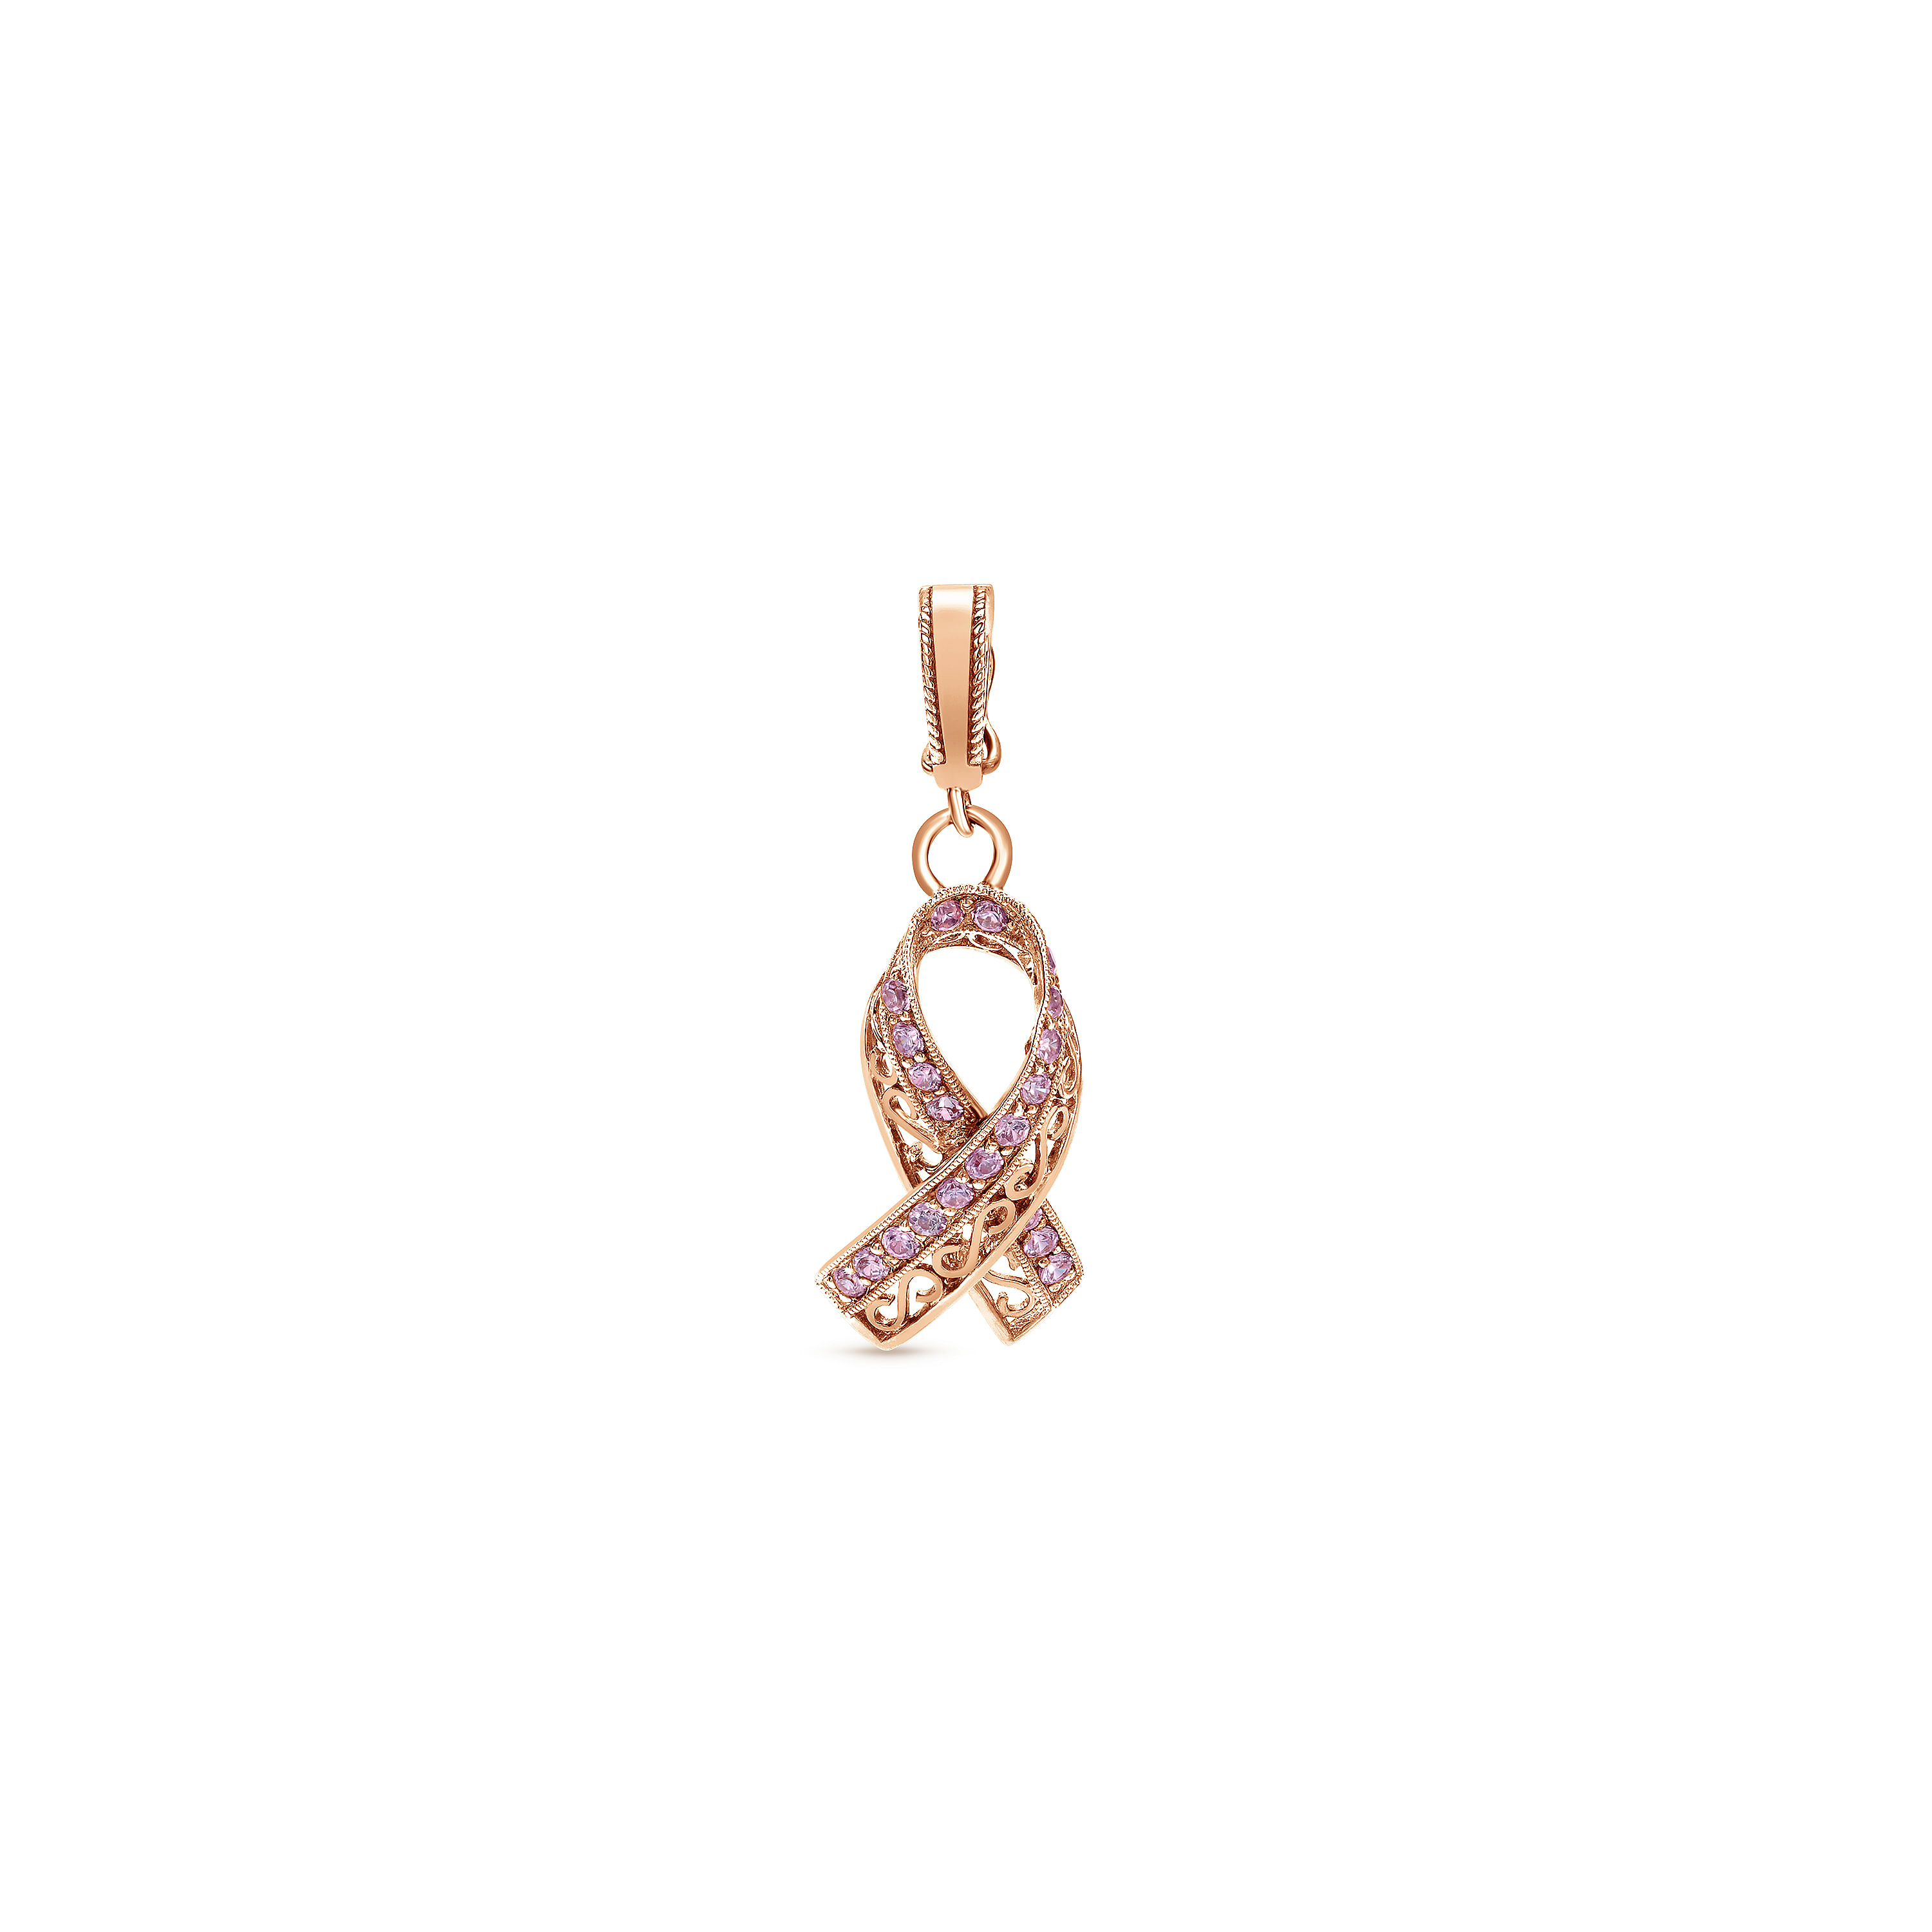 14K Rose Gold Cancer Awareness Ribbon Pendant with Pink Sapphire